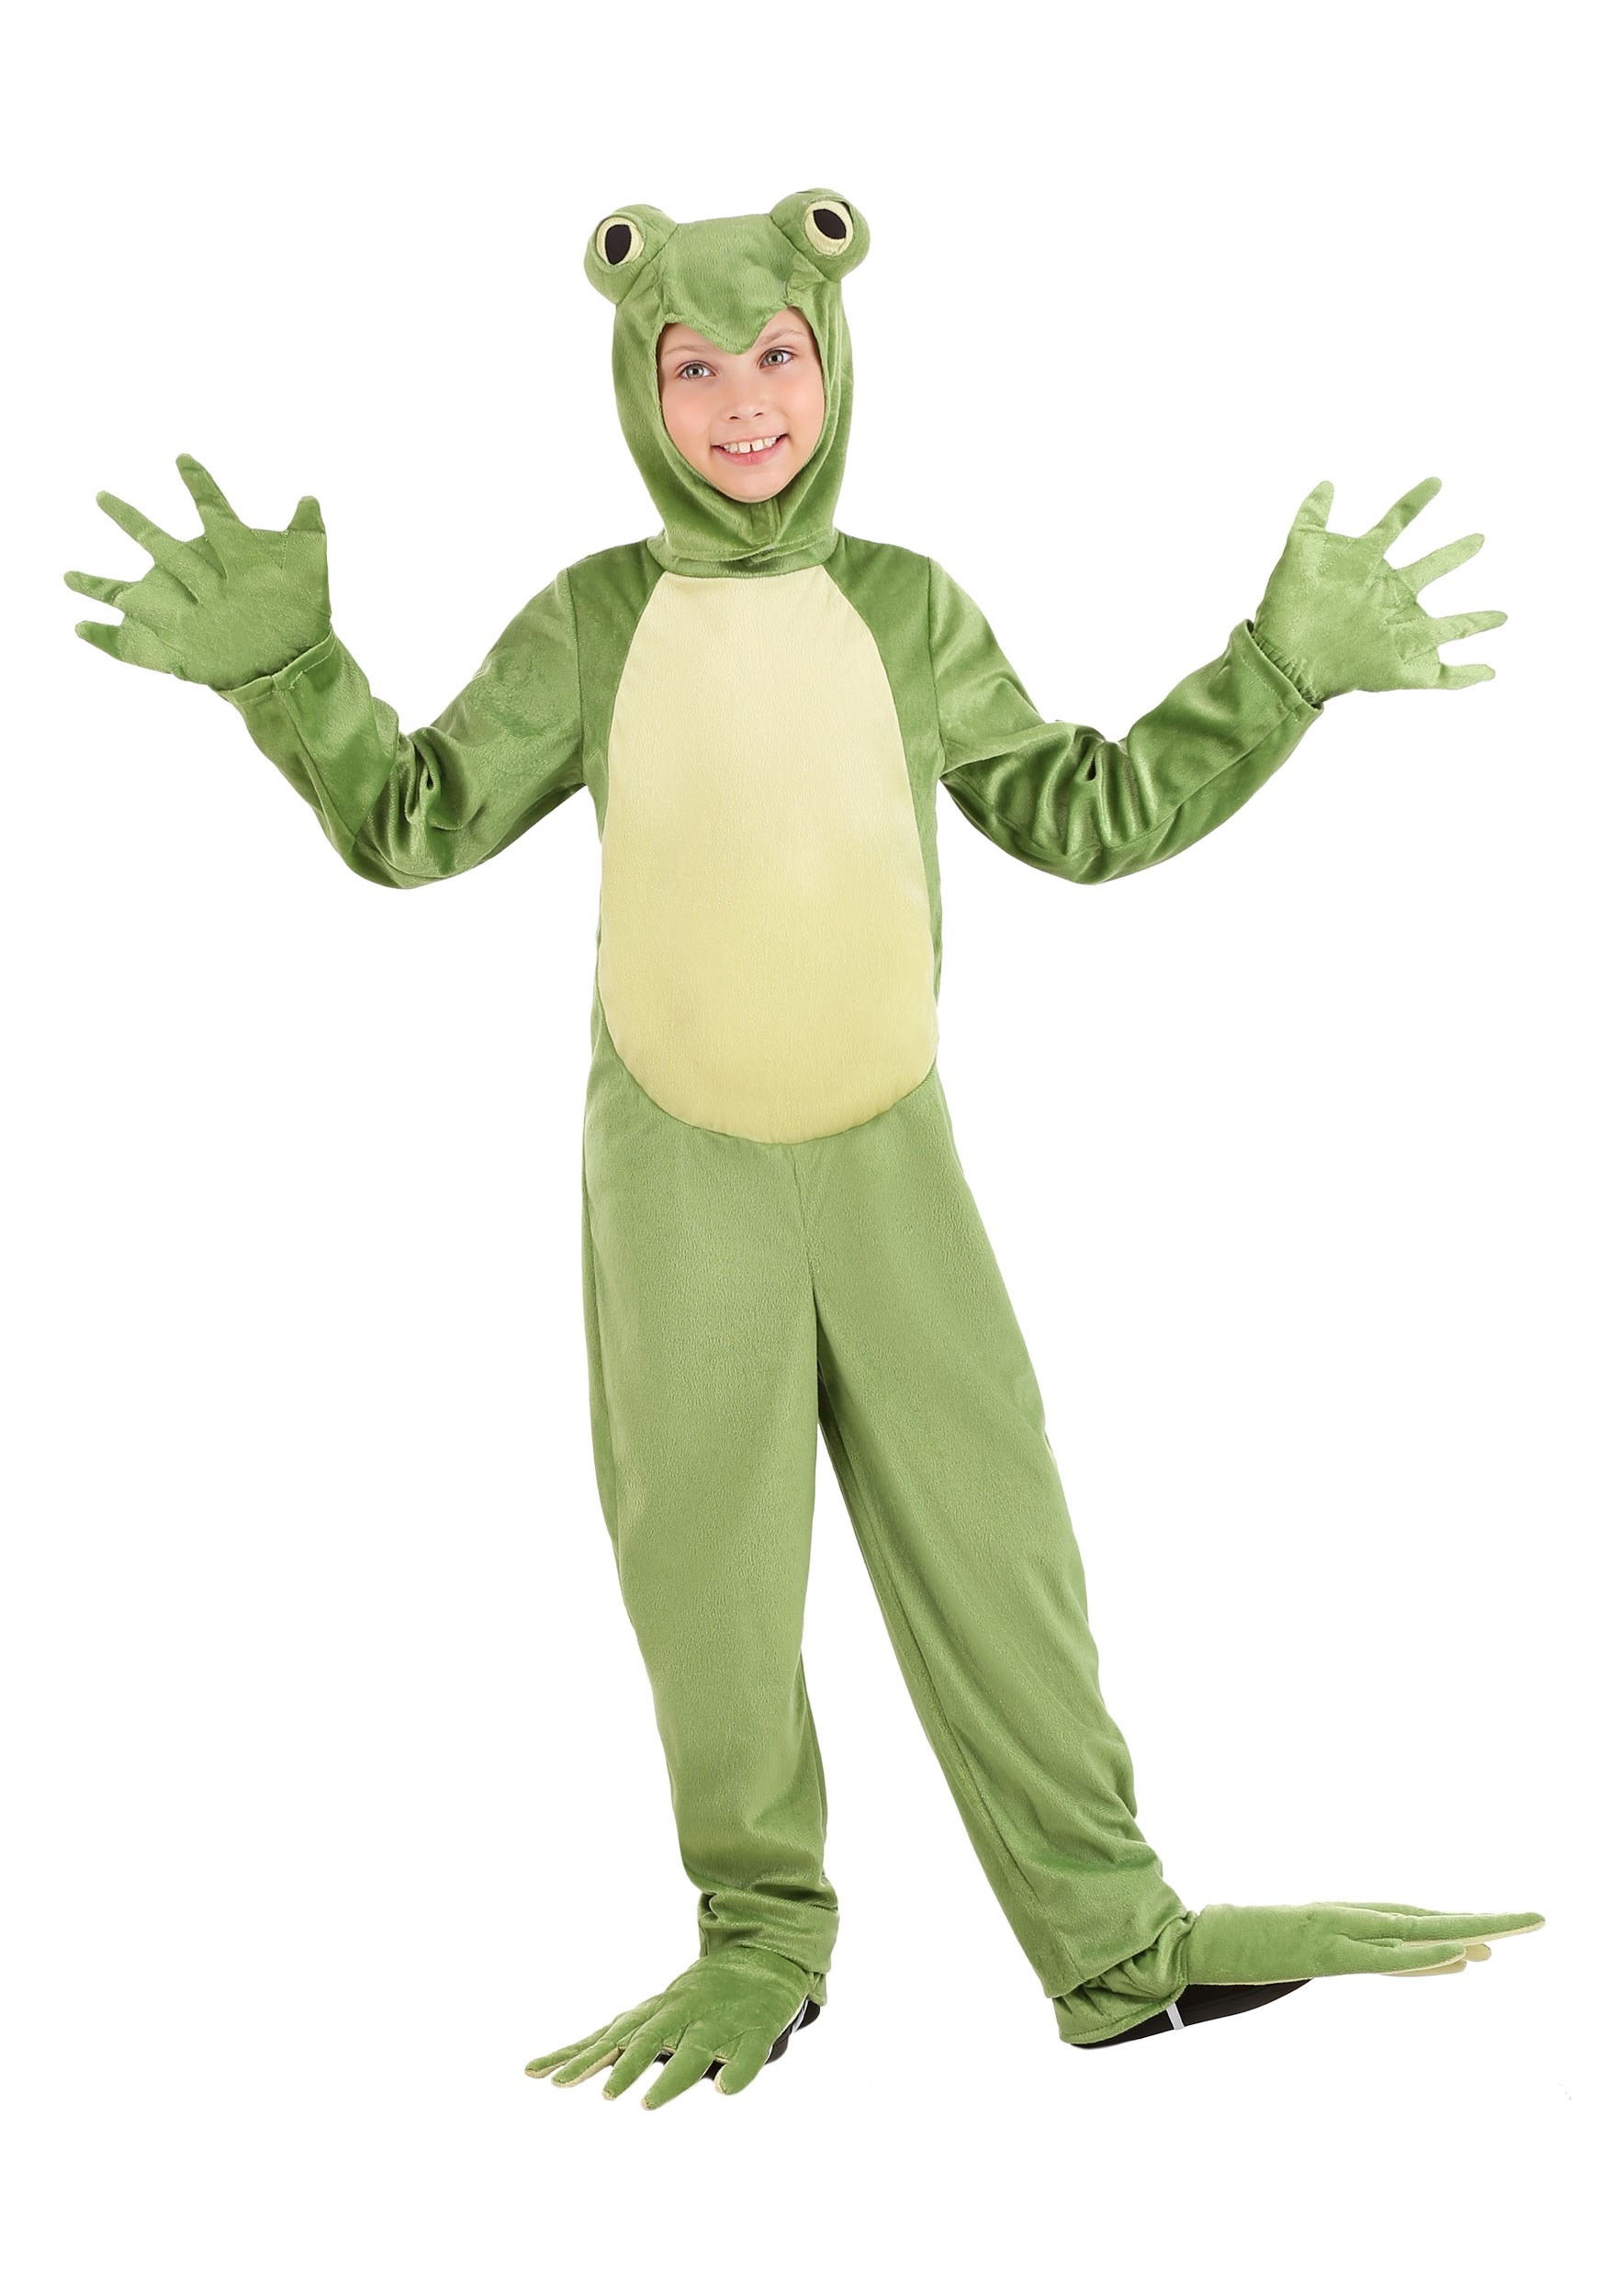 Photos - Fancy Dress Deluxe FUN Costumes  Frog Costume for Kids Green FUN1605CH 